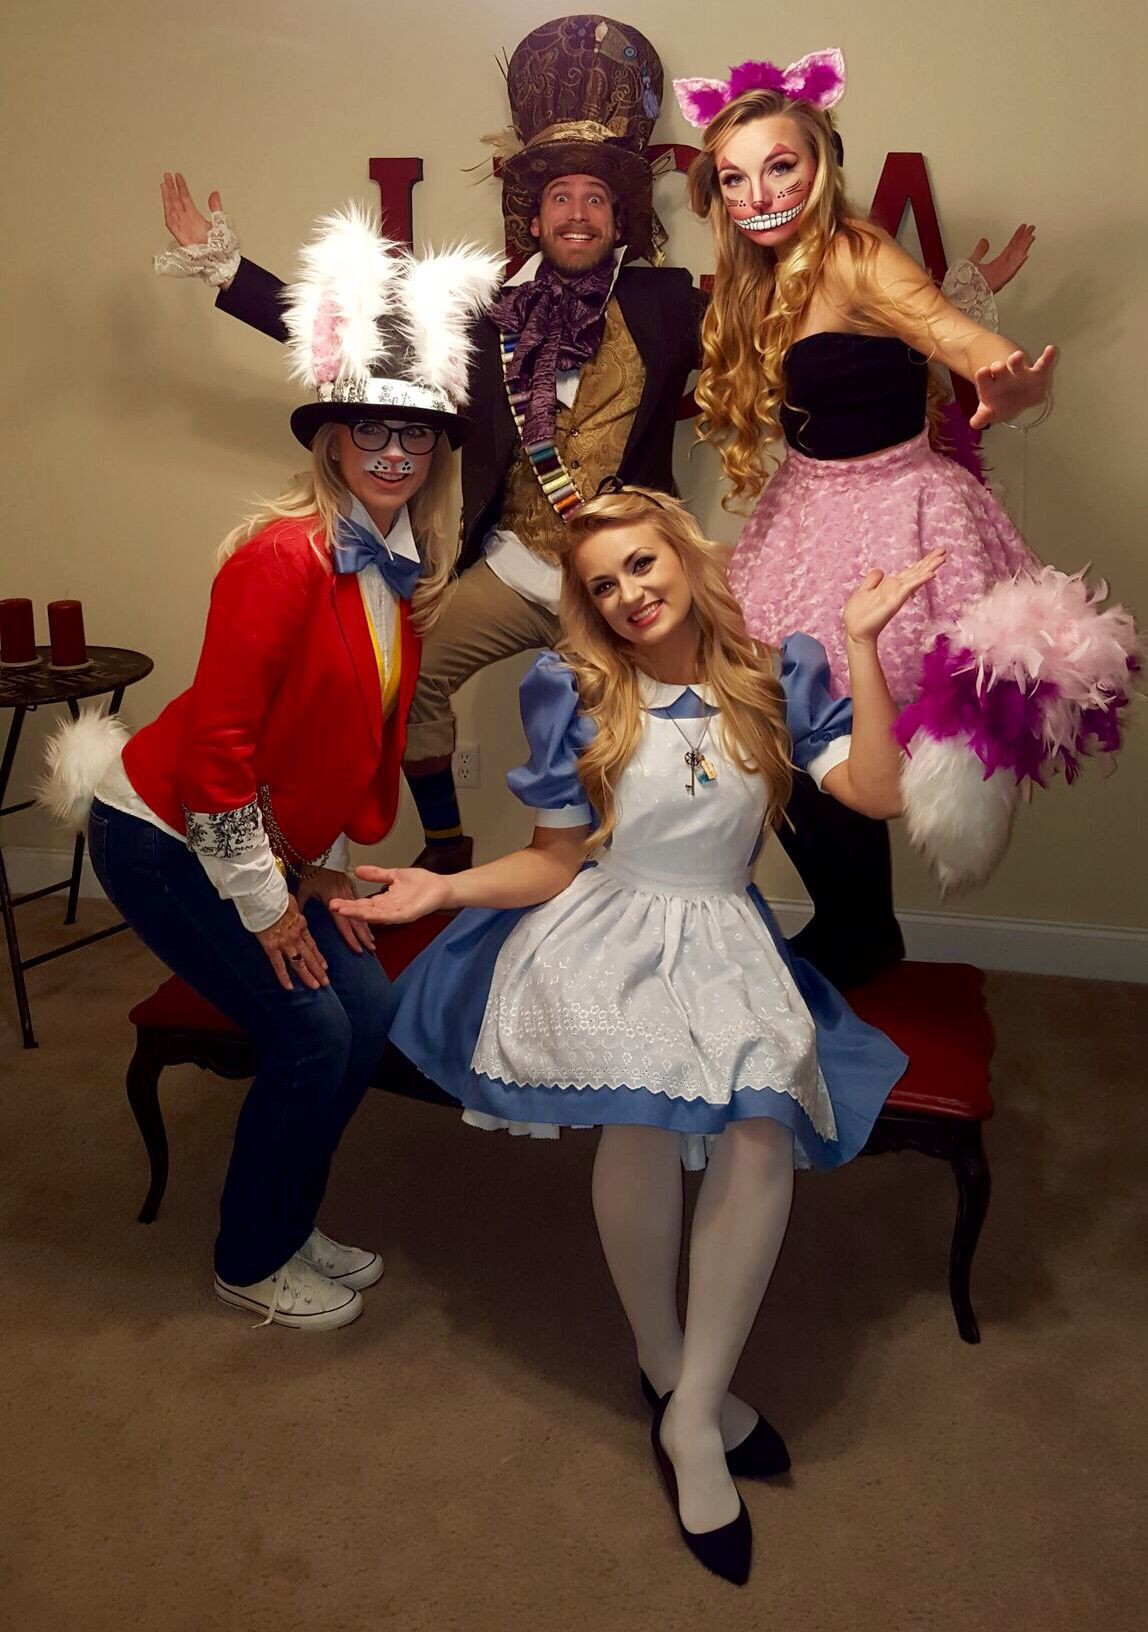 Disney Halloween Party Costume Ideas
 Bunny mad hatter Cheshire Cat and Alice in wonderland